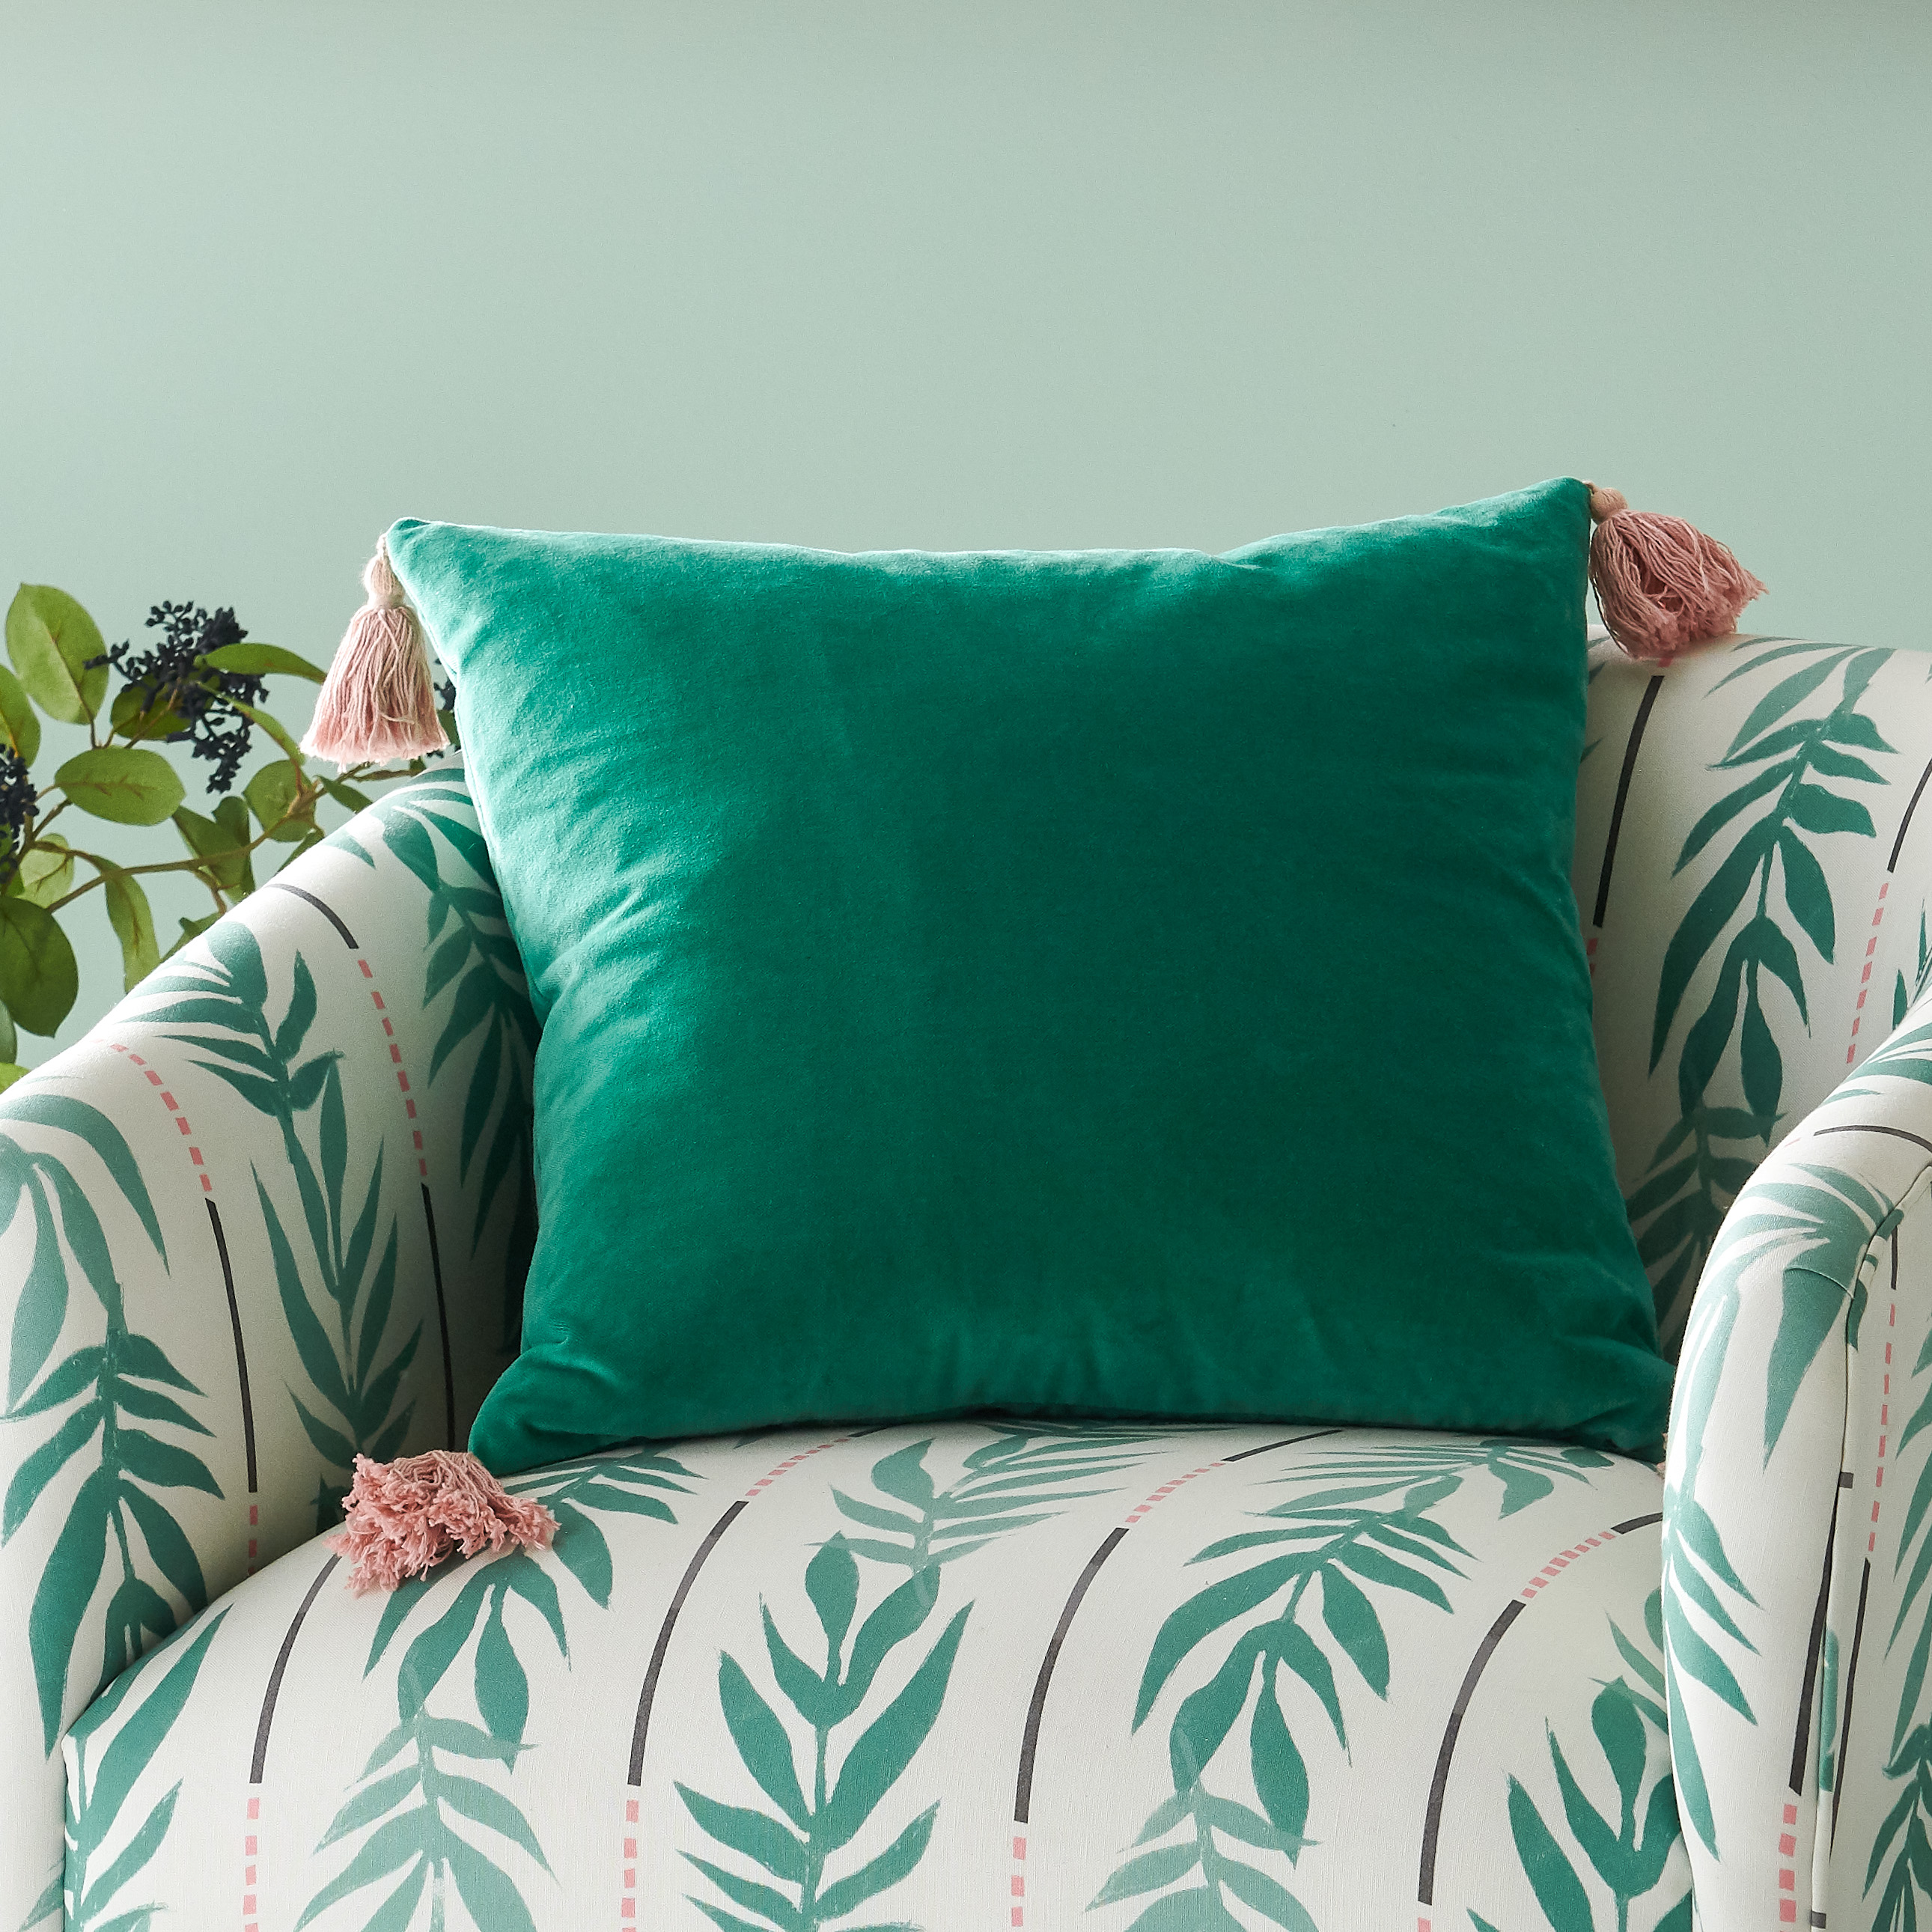 Drew Barrymore Flower Home Velvet Decorative Throw Pillow with Tassels, 20" x 20", Green - image 5 of 5